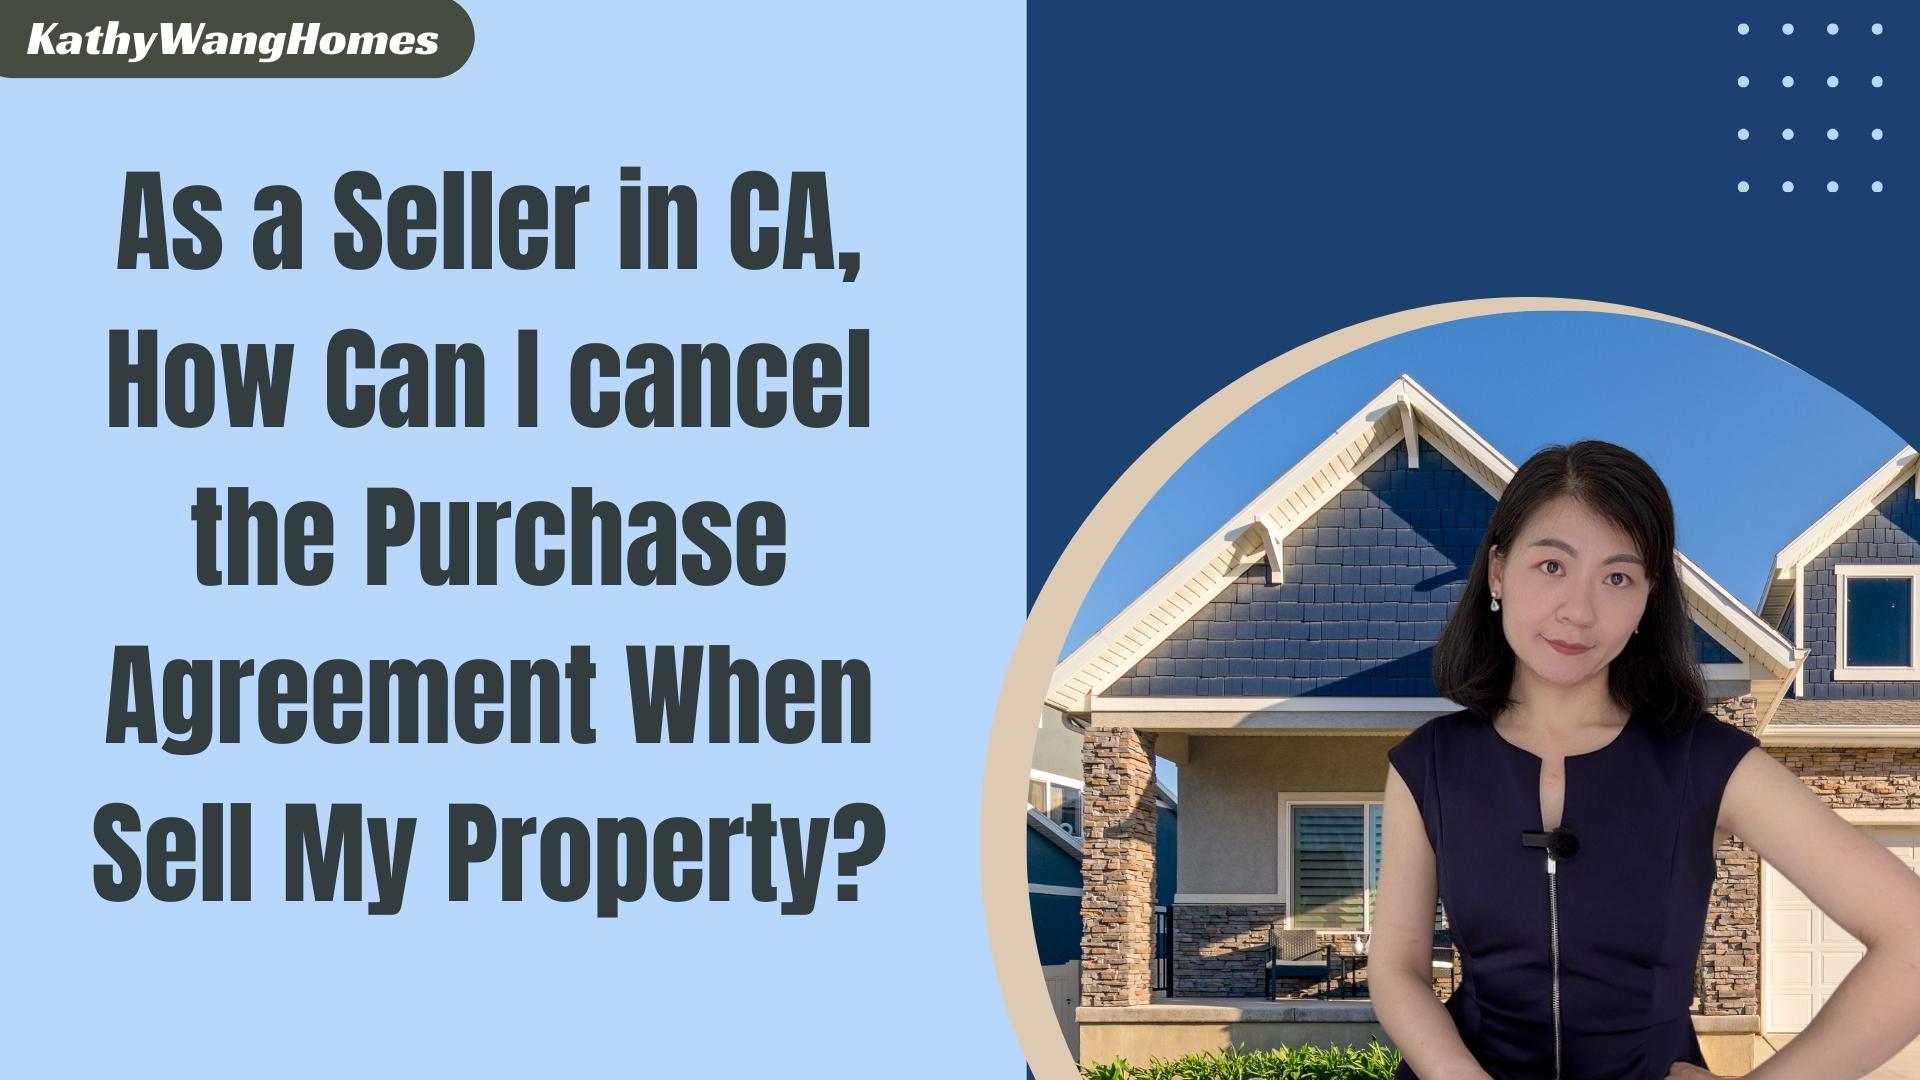 As a seller in Bay Area in Califorinia, can I cancel the purchase agreement and stop selling my house?